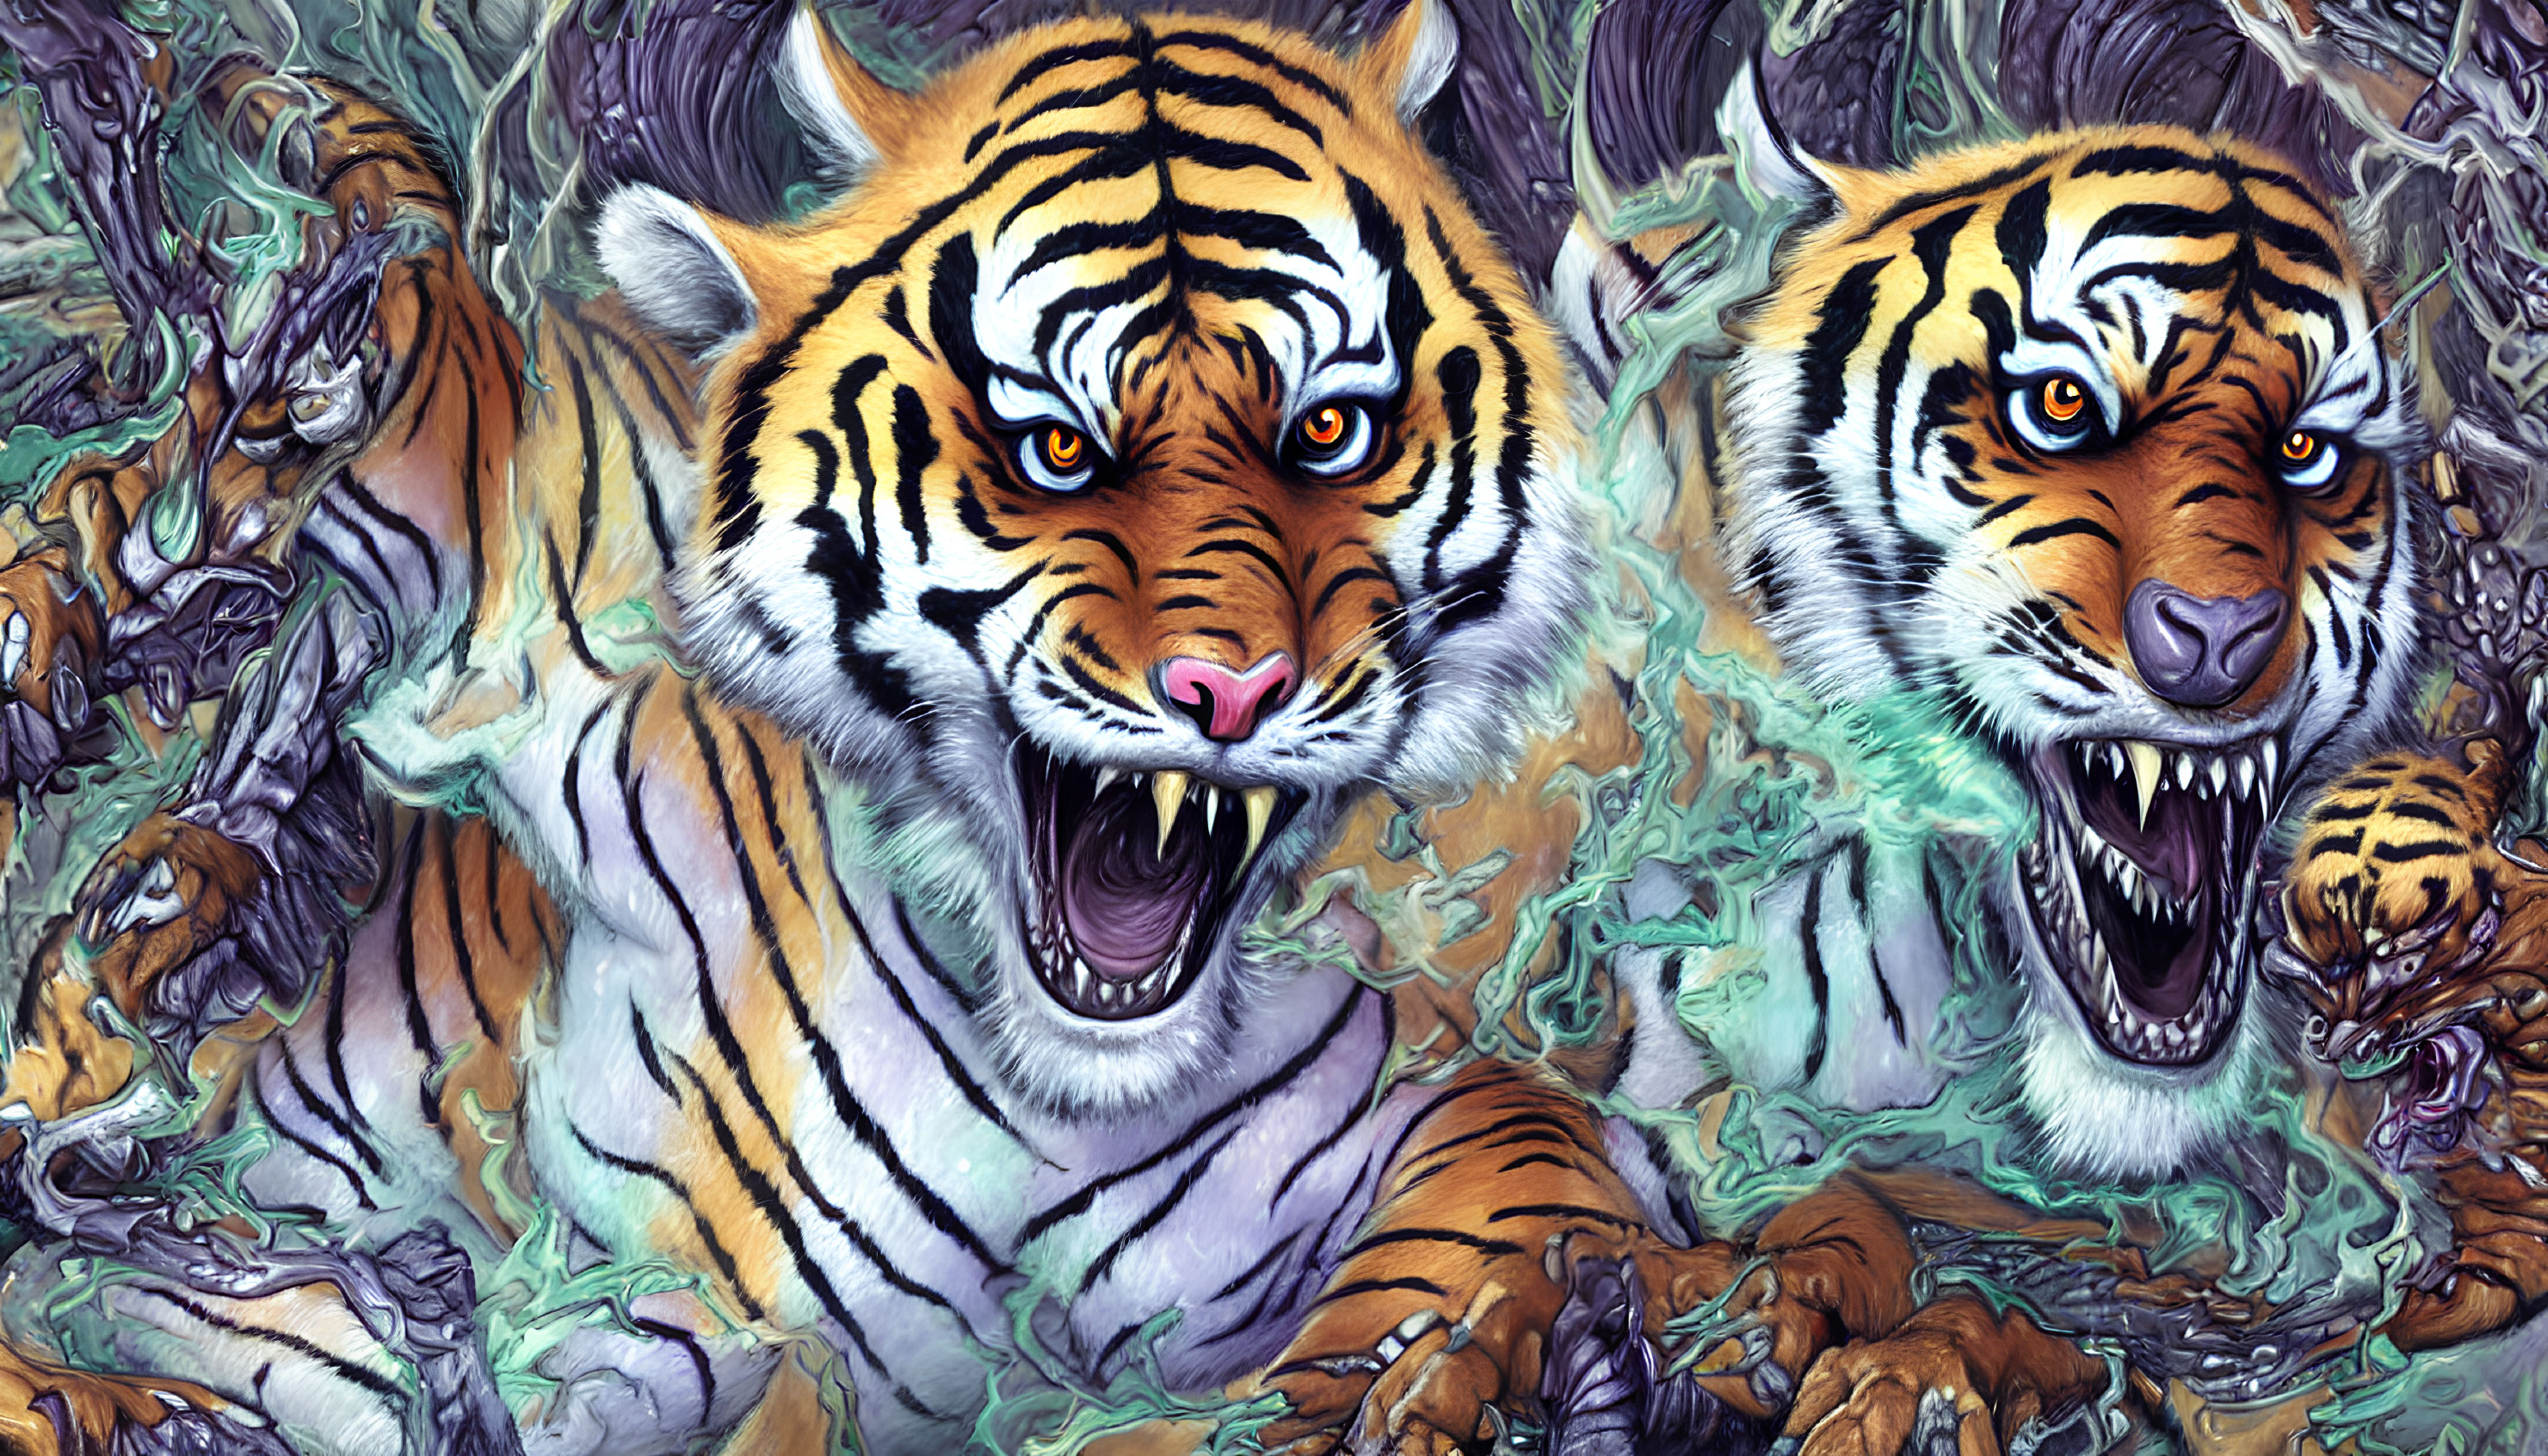 Abstract artwork of two fierce tigers in vibrant colors